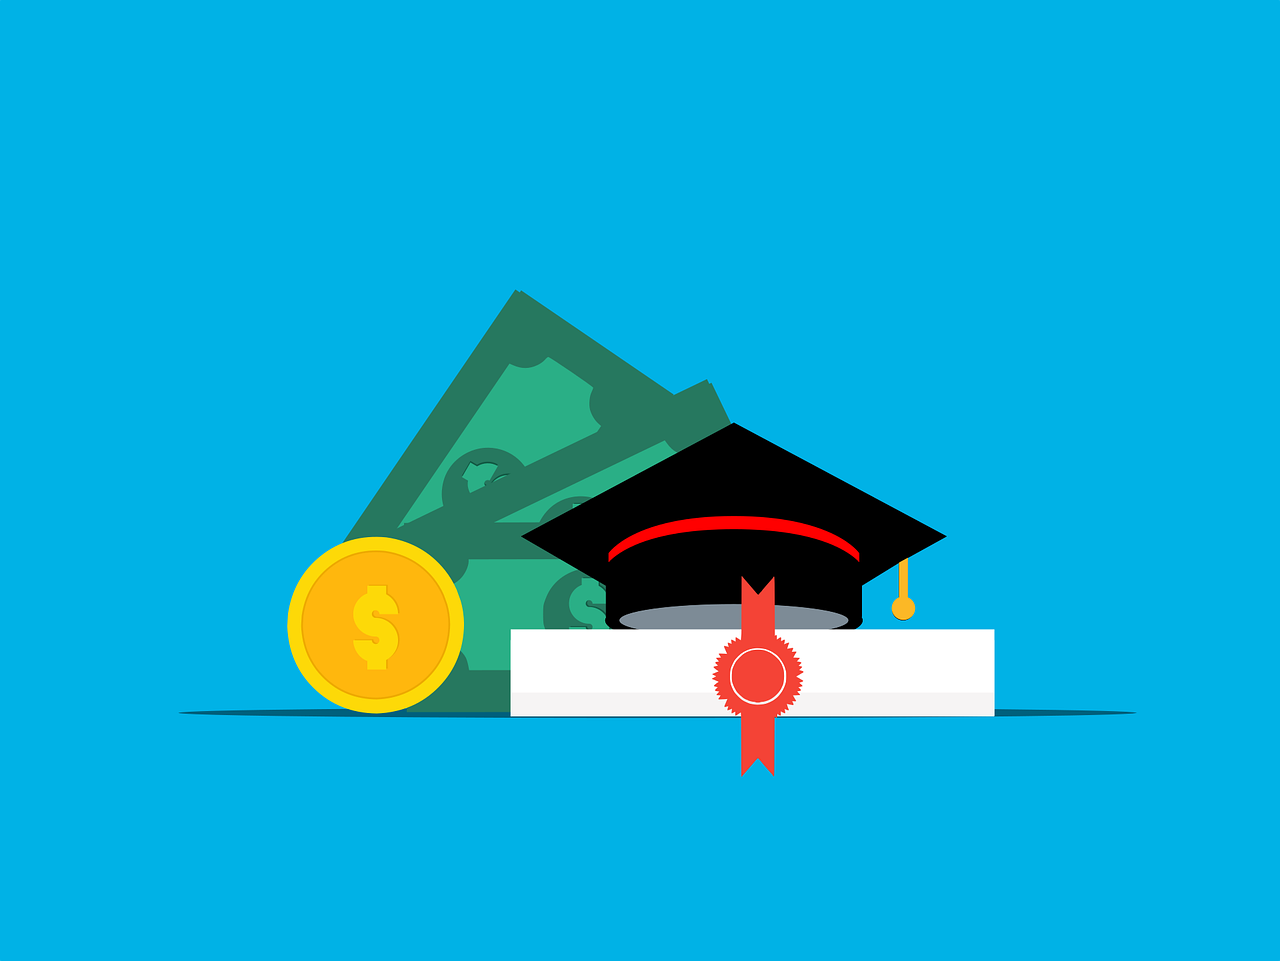 Scholarship Education Investment graphic by Mohamed Hassan, courtesy of Pixabay.